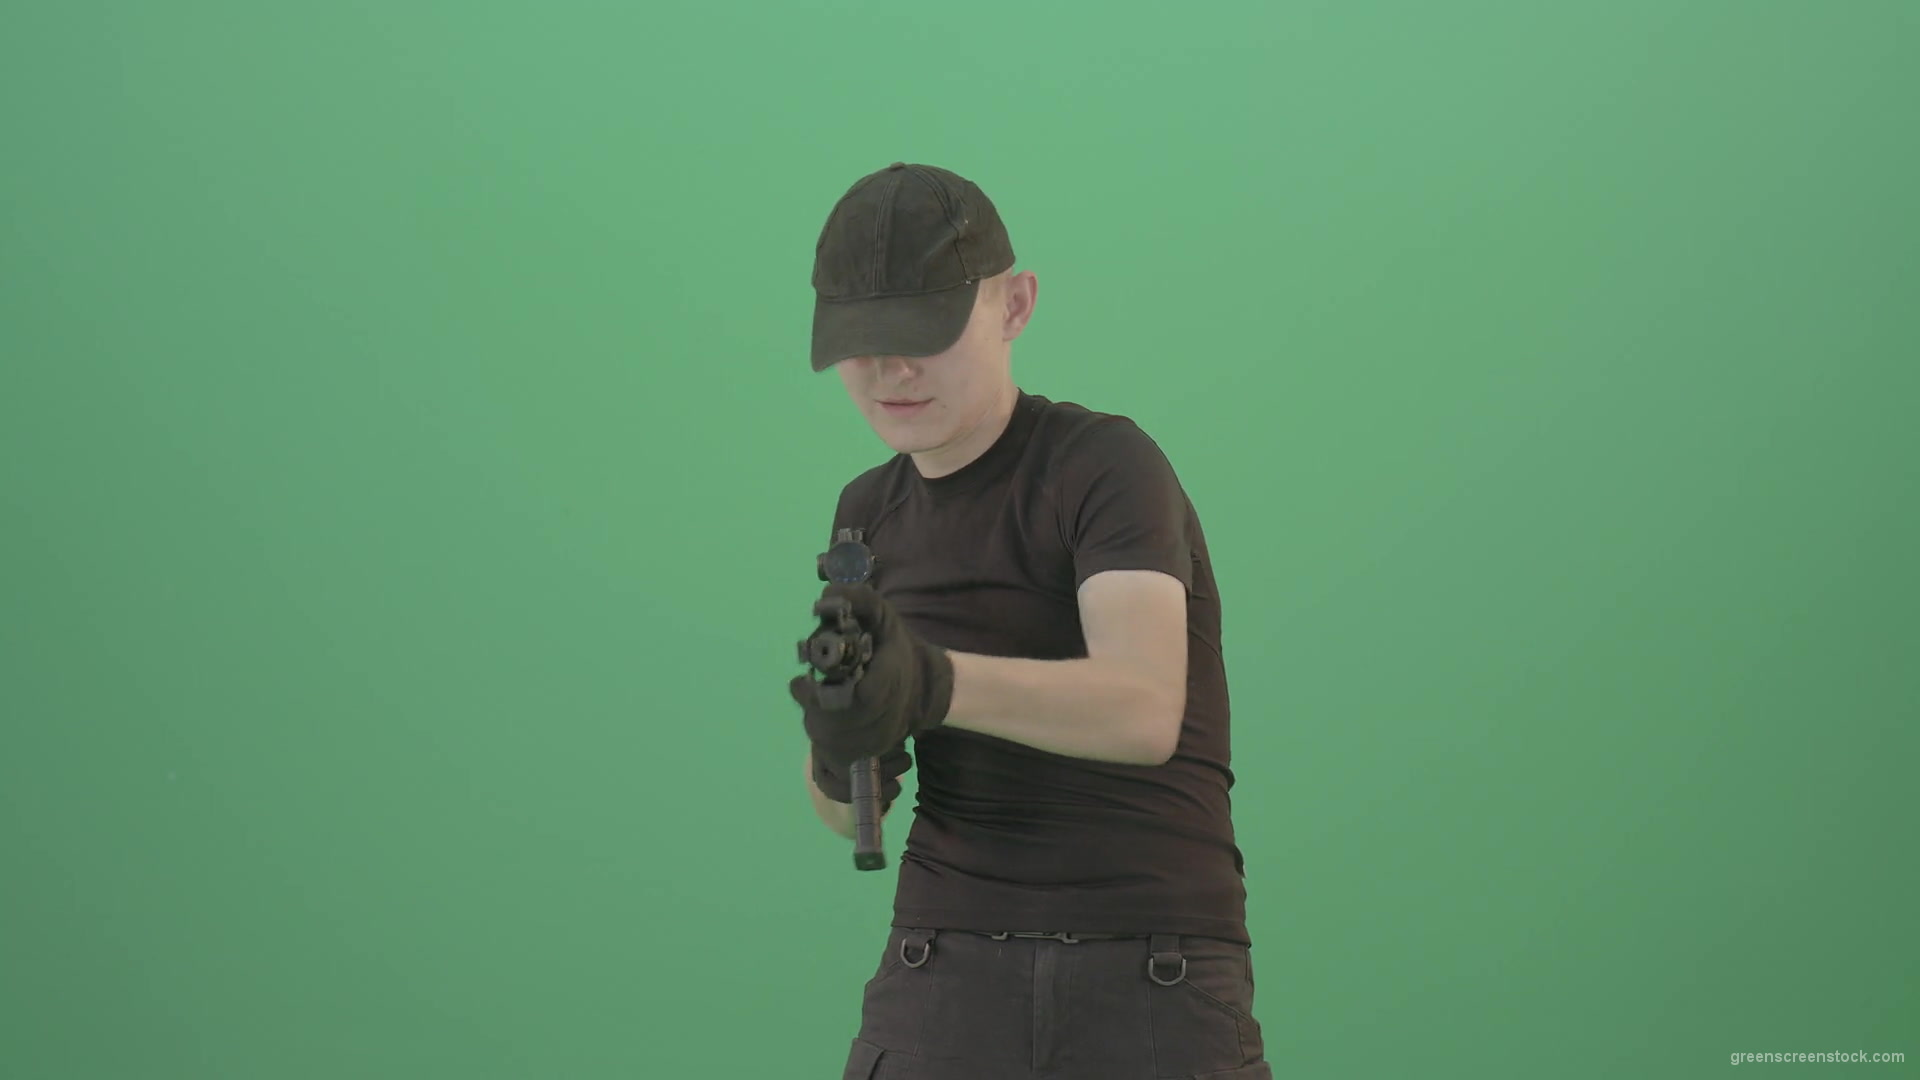 Funny-Small-boy-terrorist-shooting-enemies-from-machine-gun-isolated-on-green-screen-4K-Video-Footage-1920_009 Green Screen Stock